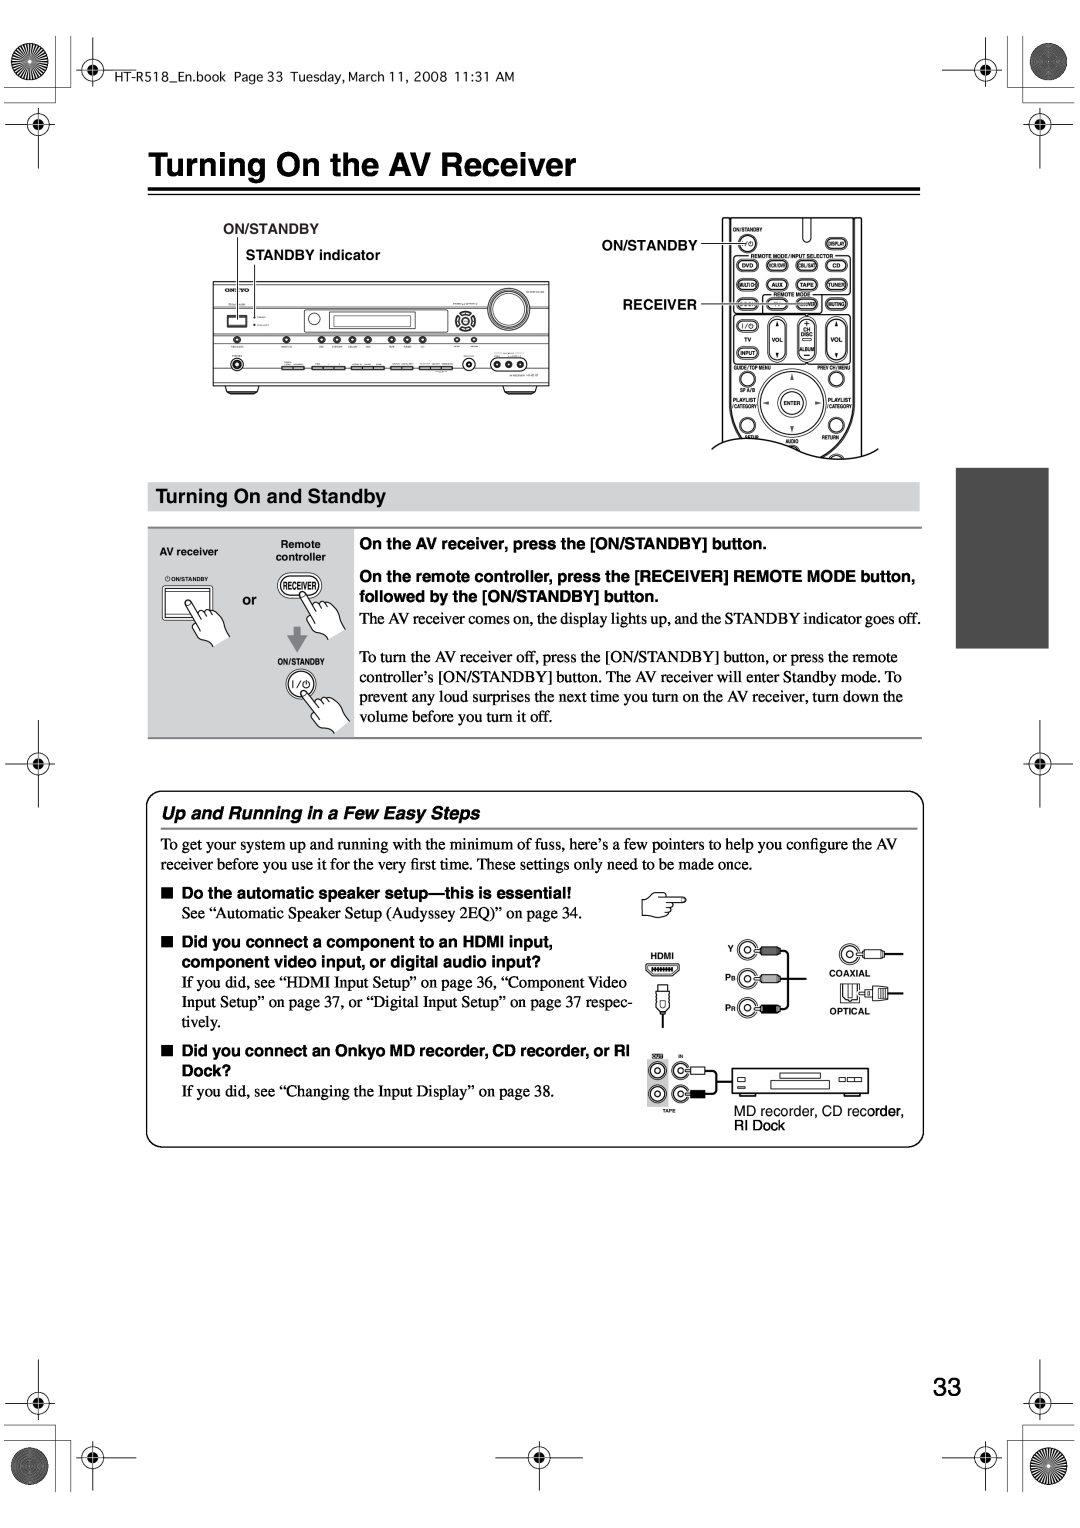 Onkyo HT-R518 instruction manual Turning On the AV Receiver, Turning On and Standby, Up and Running in a Few Easy Steps 